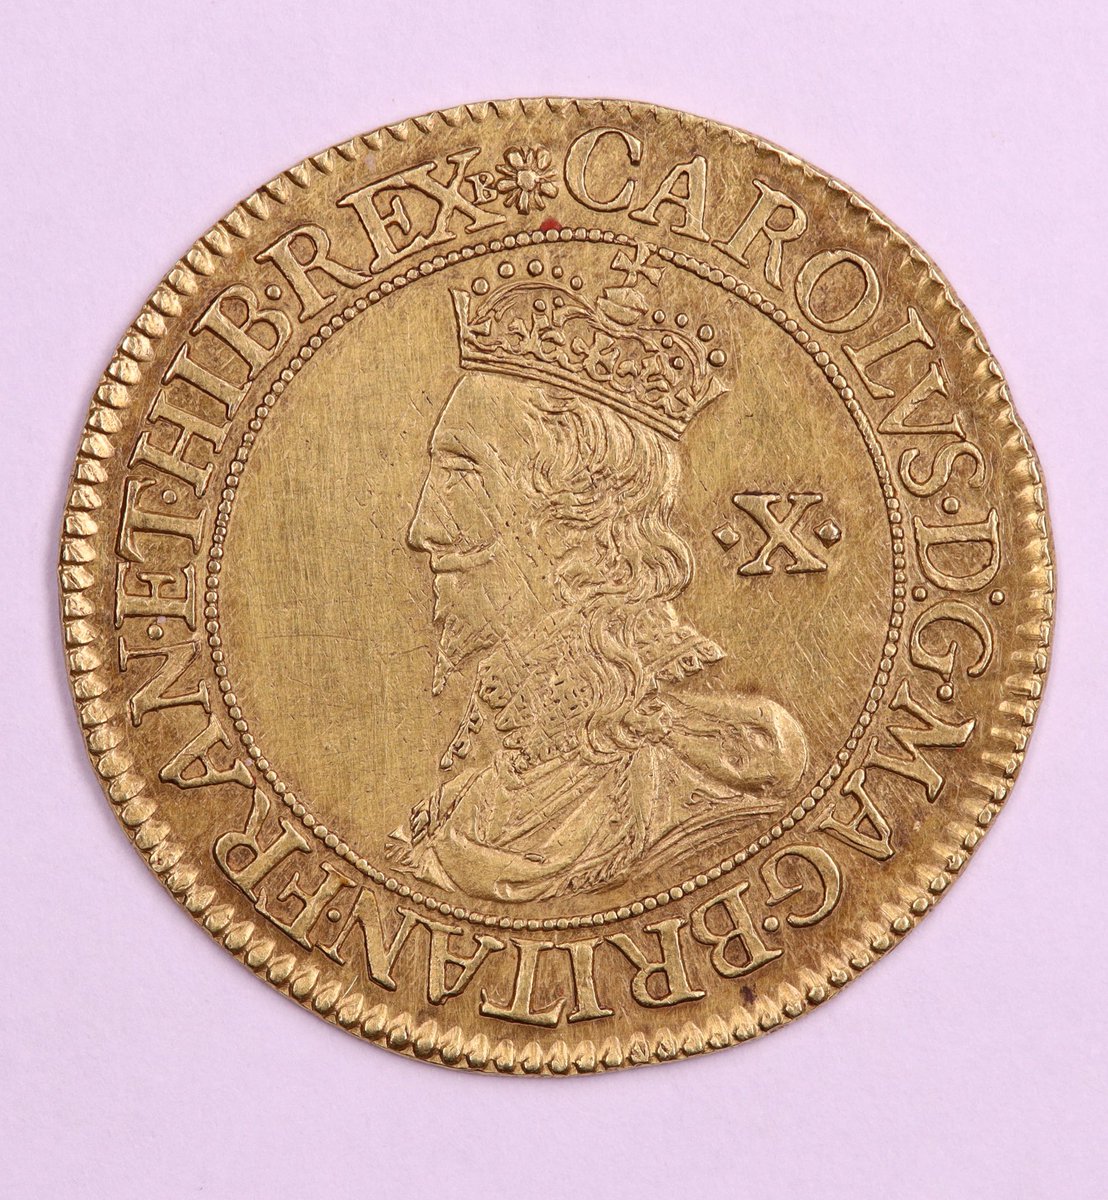 An English gold double crown of Charles I. It was engraved by and minted using machinery designed by Nicholas Briot between 1631 & 1632. Only a small number of machine-made coins were struck for circulation in England during Charles I’s reign. From @NtlMuseumsScot’s collection.